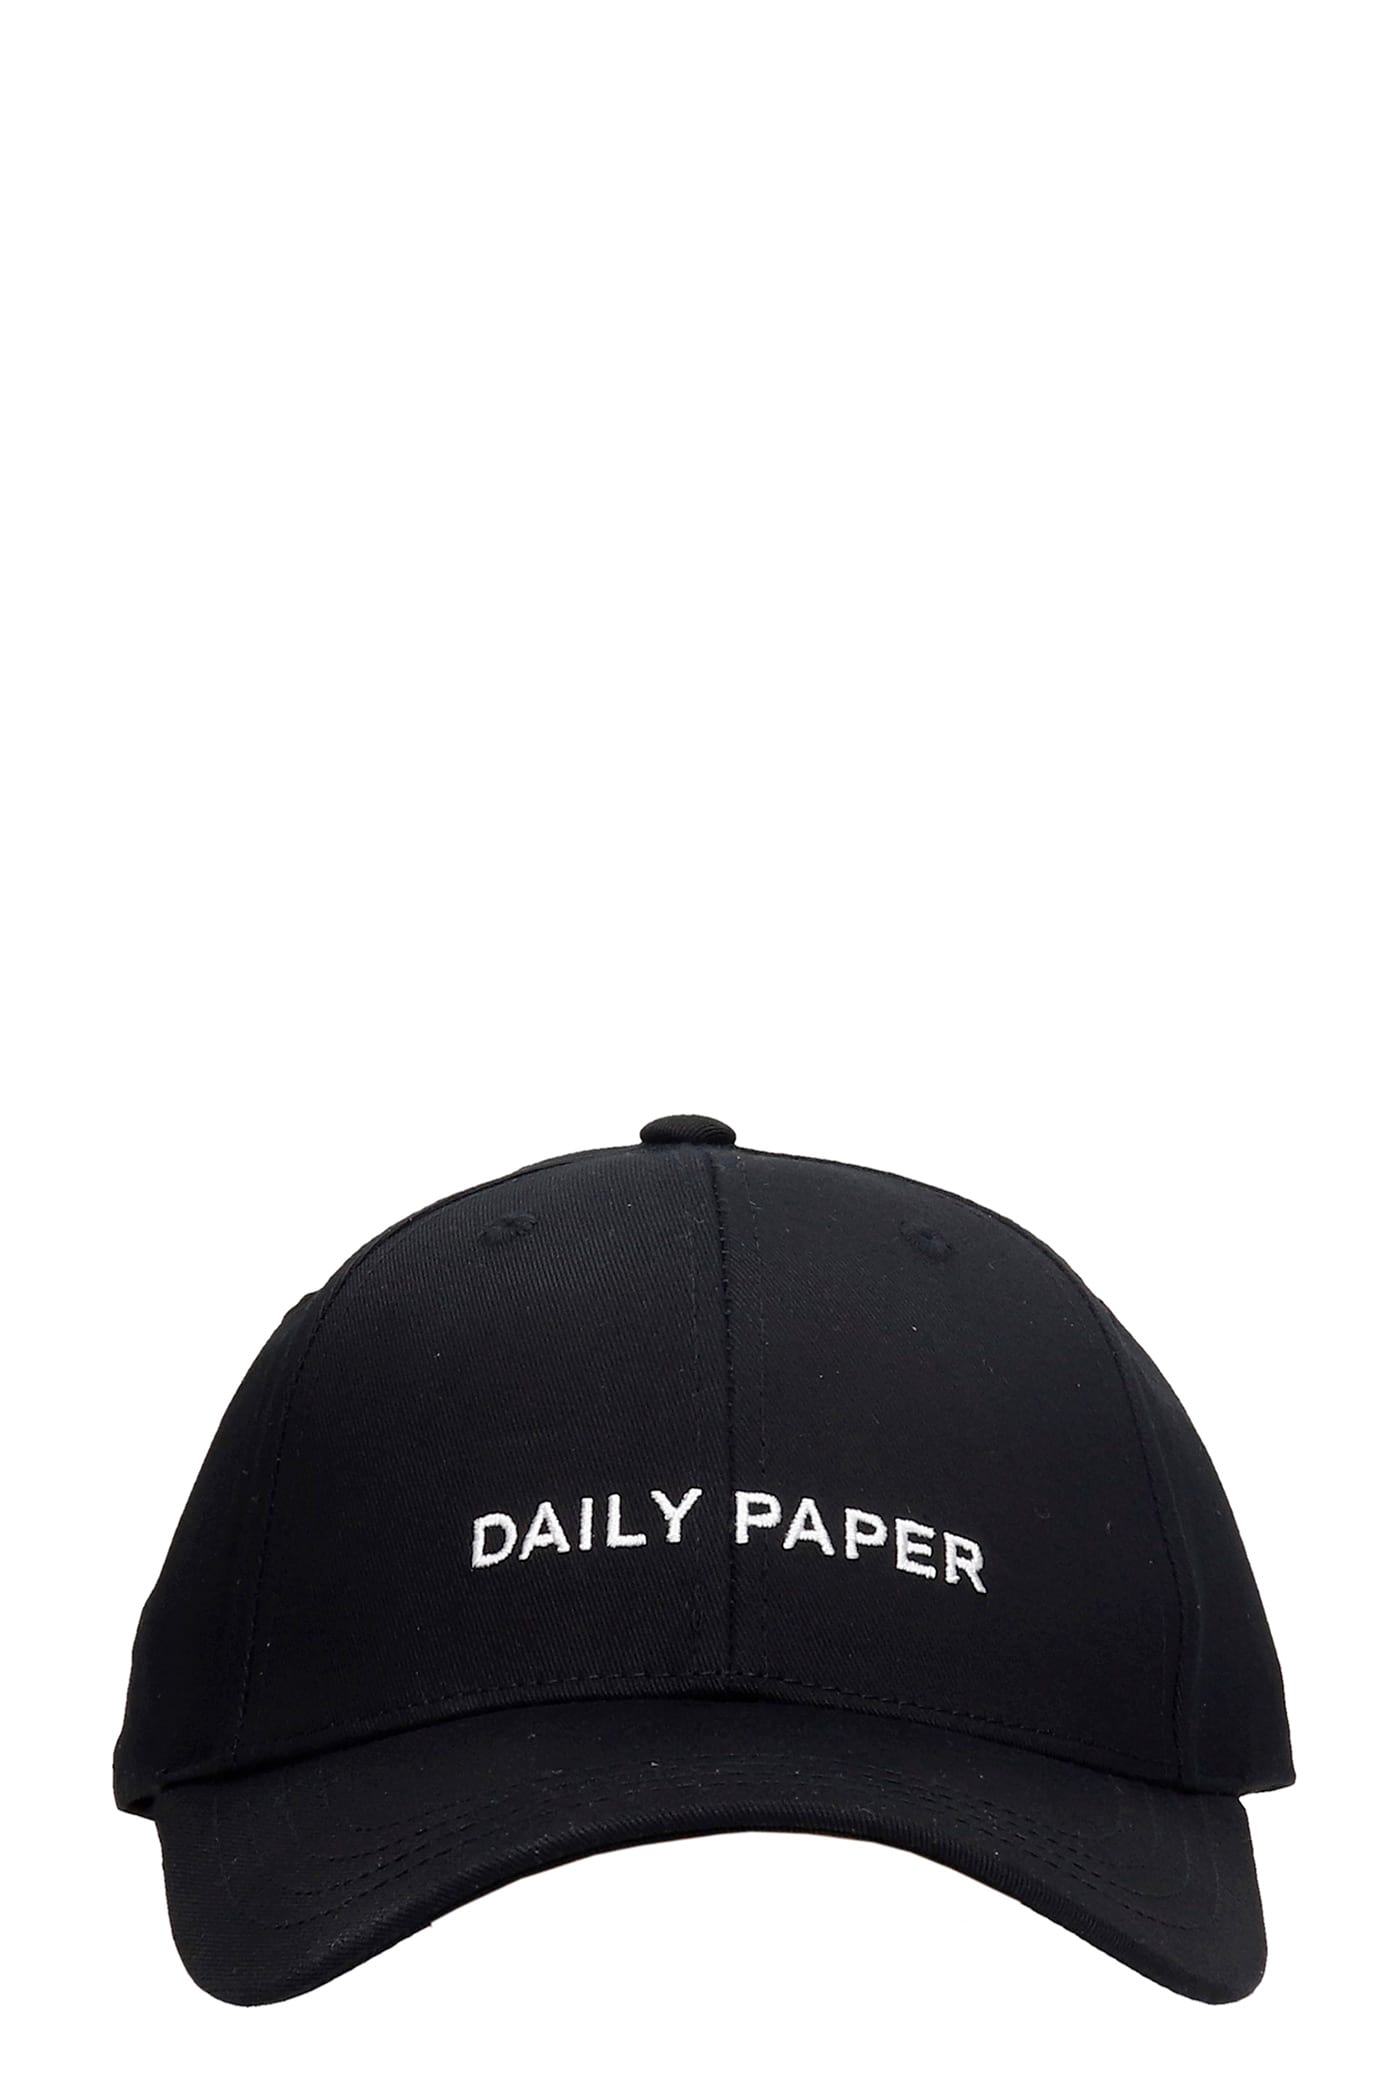 DAILY PAPER HATS IN BLACK COTTON,2111015